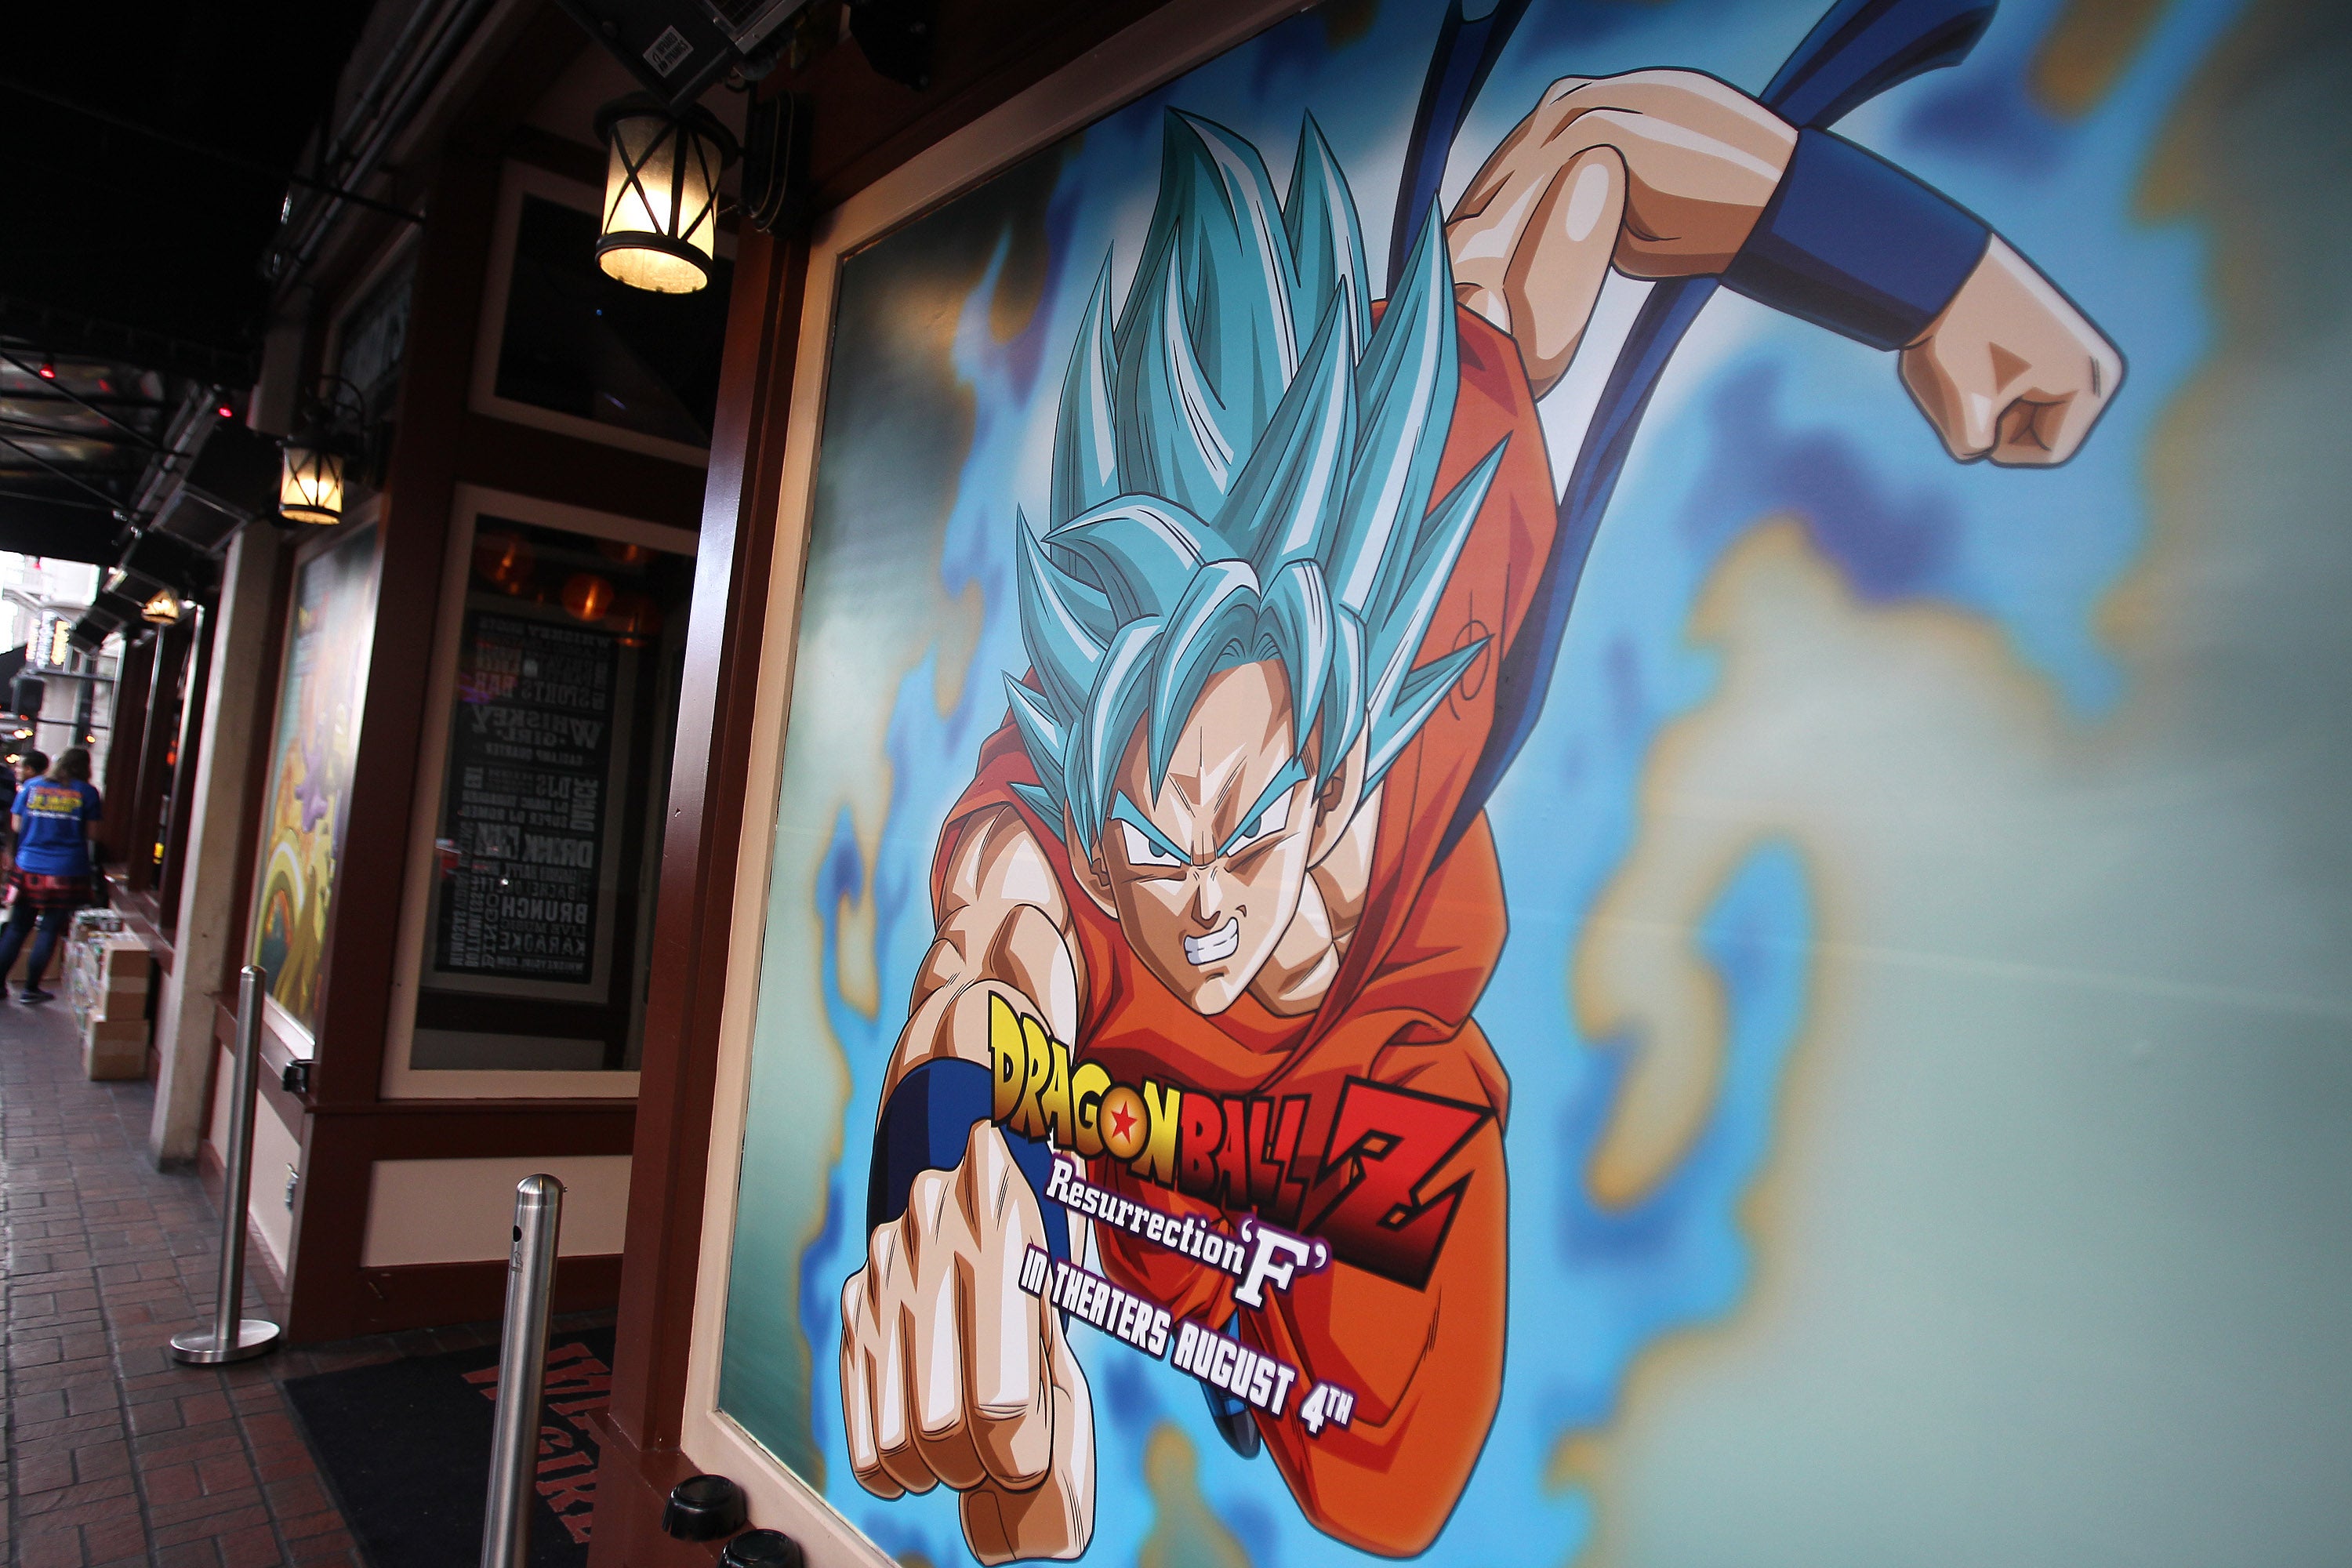 A general view of atmosphere during the Dragon Ball Z: Resurrection 'F' San Diego Comic Con opening night VIP party held at Whiskey Girl in 2015